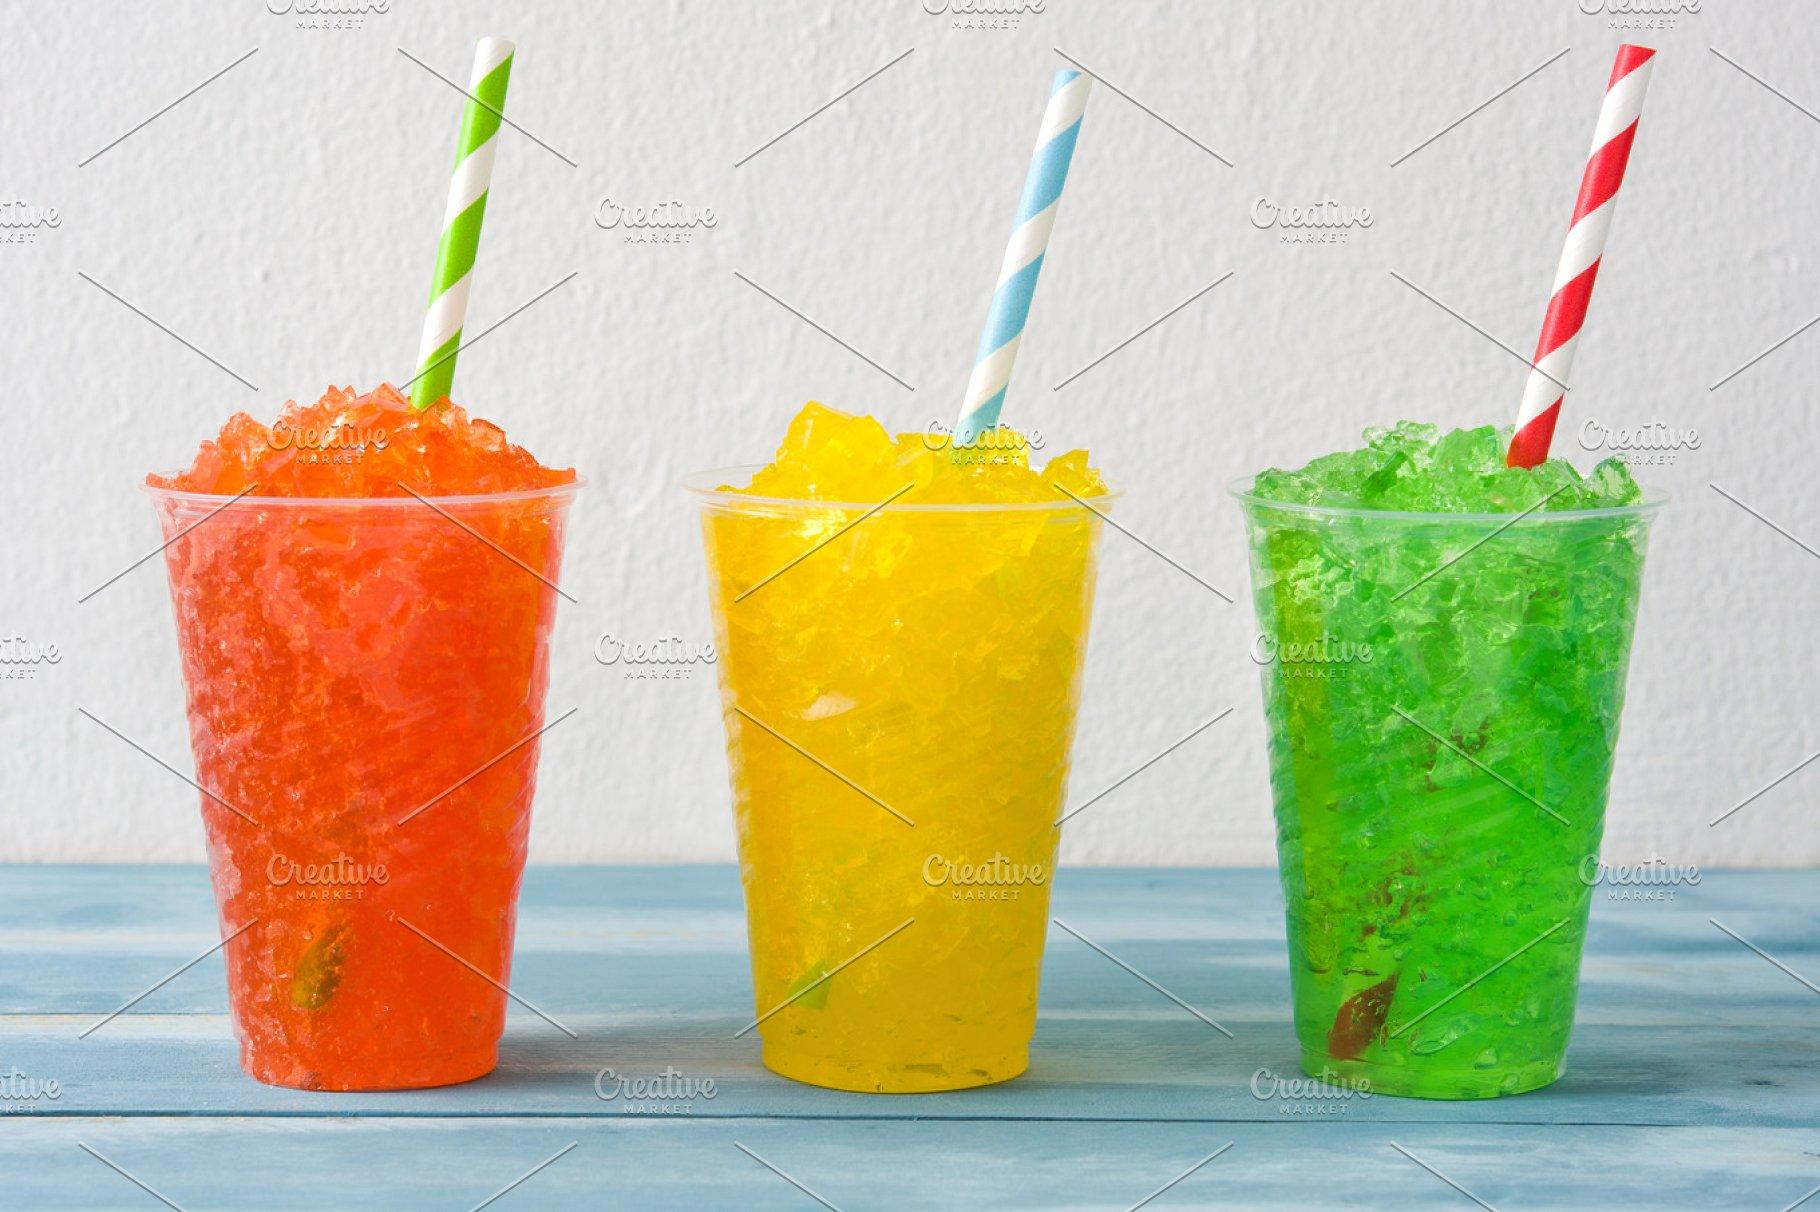 5 Creative Glass Presentations for Your Slush and Drinks